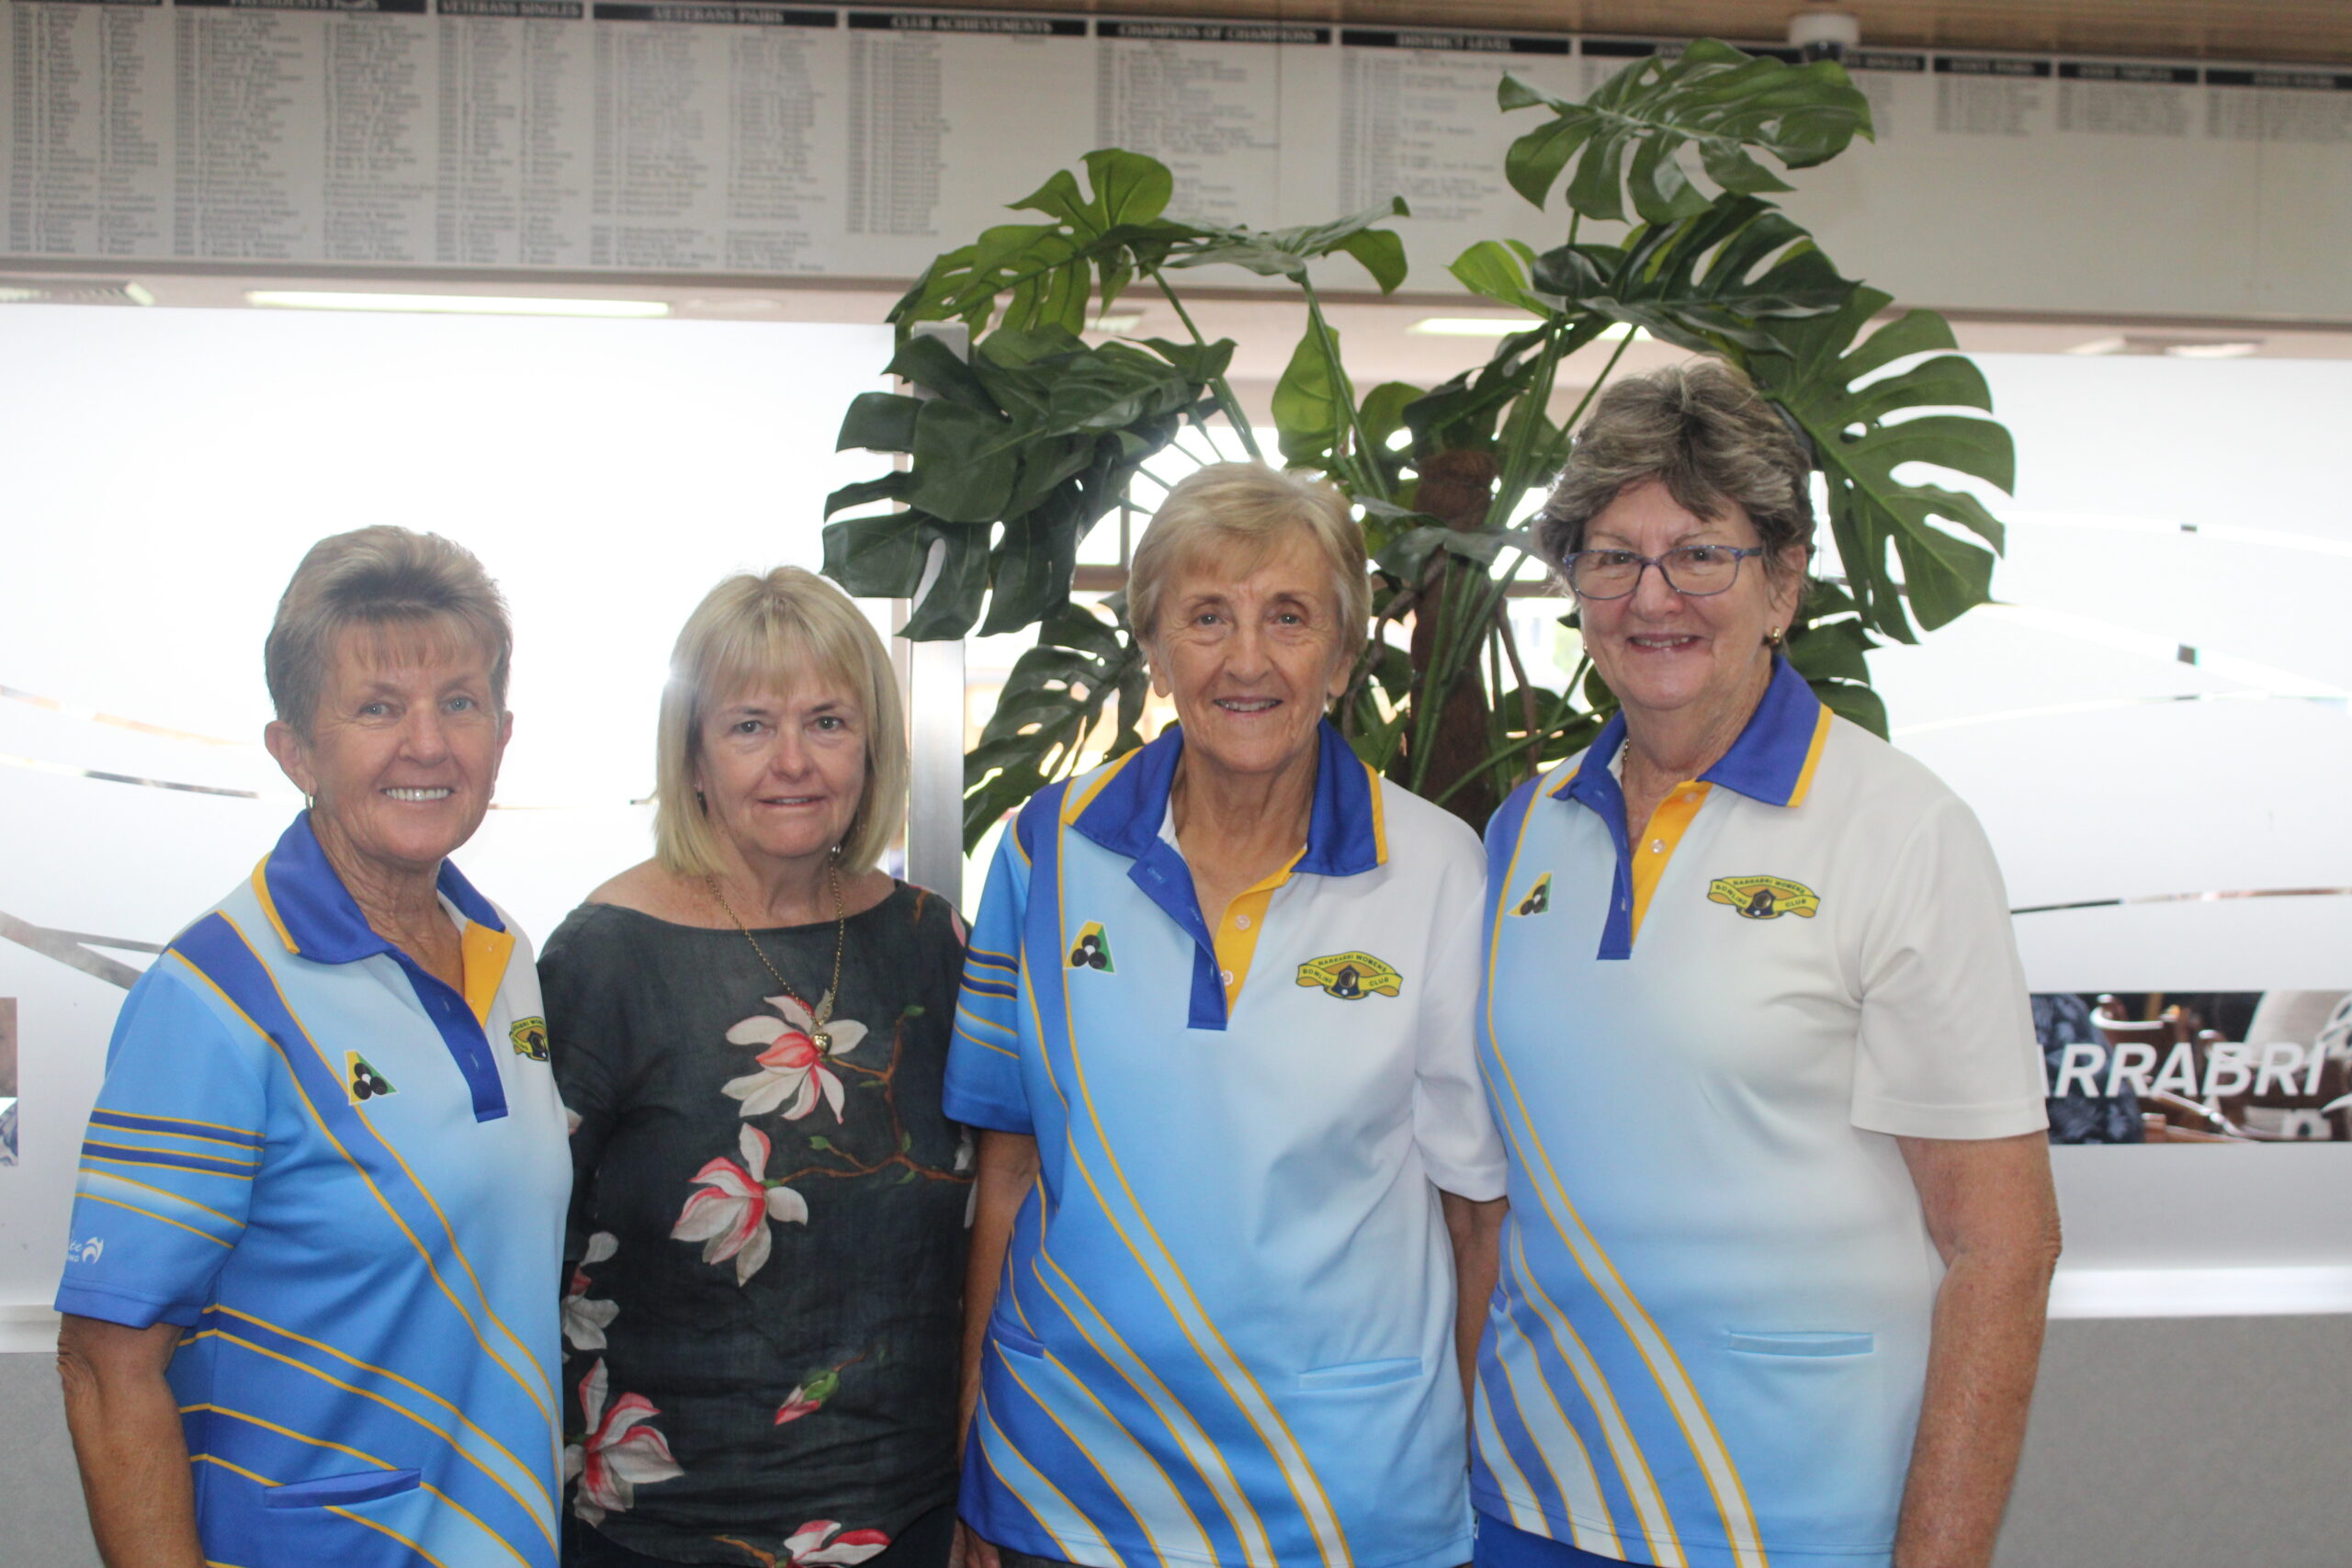 Narrabri Lady Bowlers social committee: Glennis Godden, Leslie Anderson, Di Chessell and Rhonda Welchman.